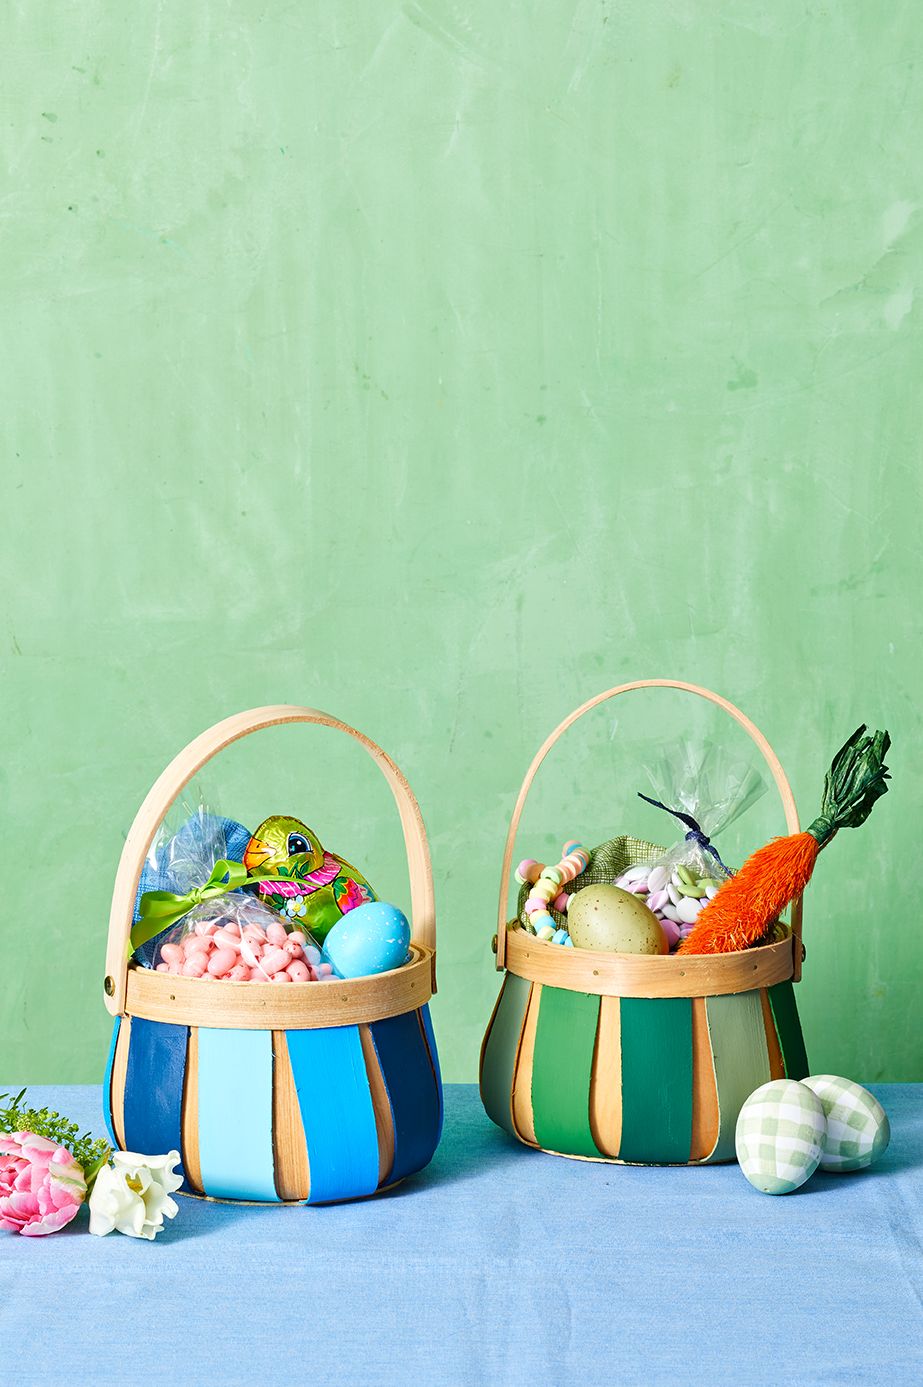 DIY Easter Baskets Fillers (that don't come from a store) - Your